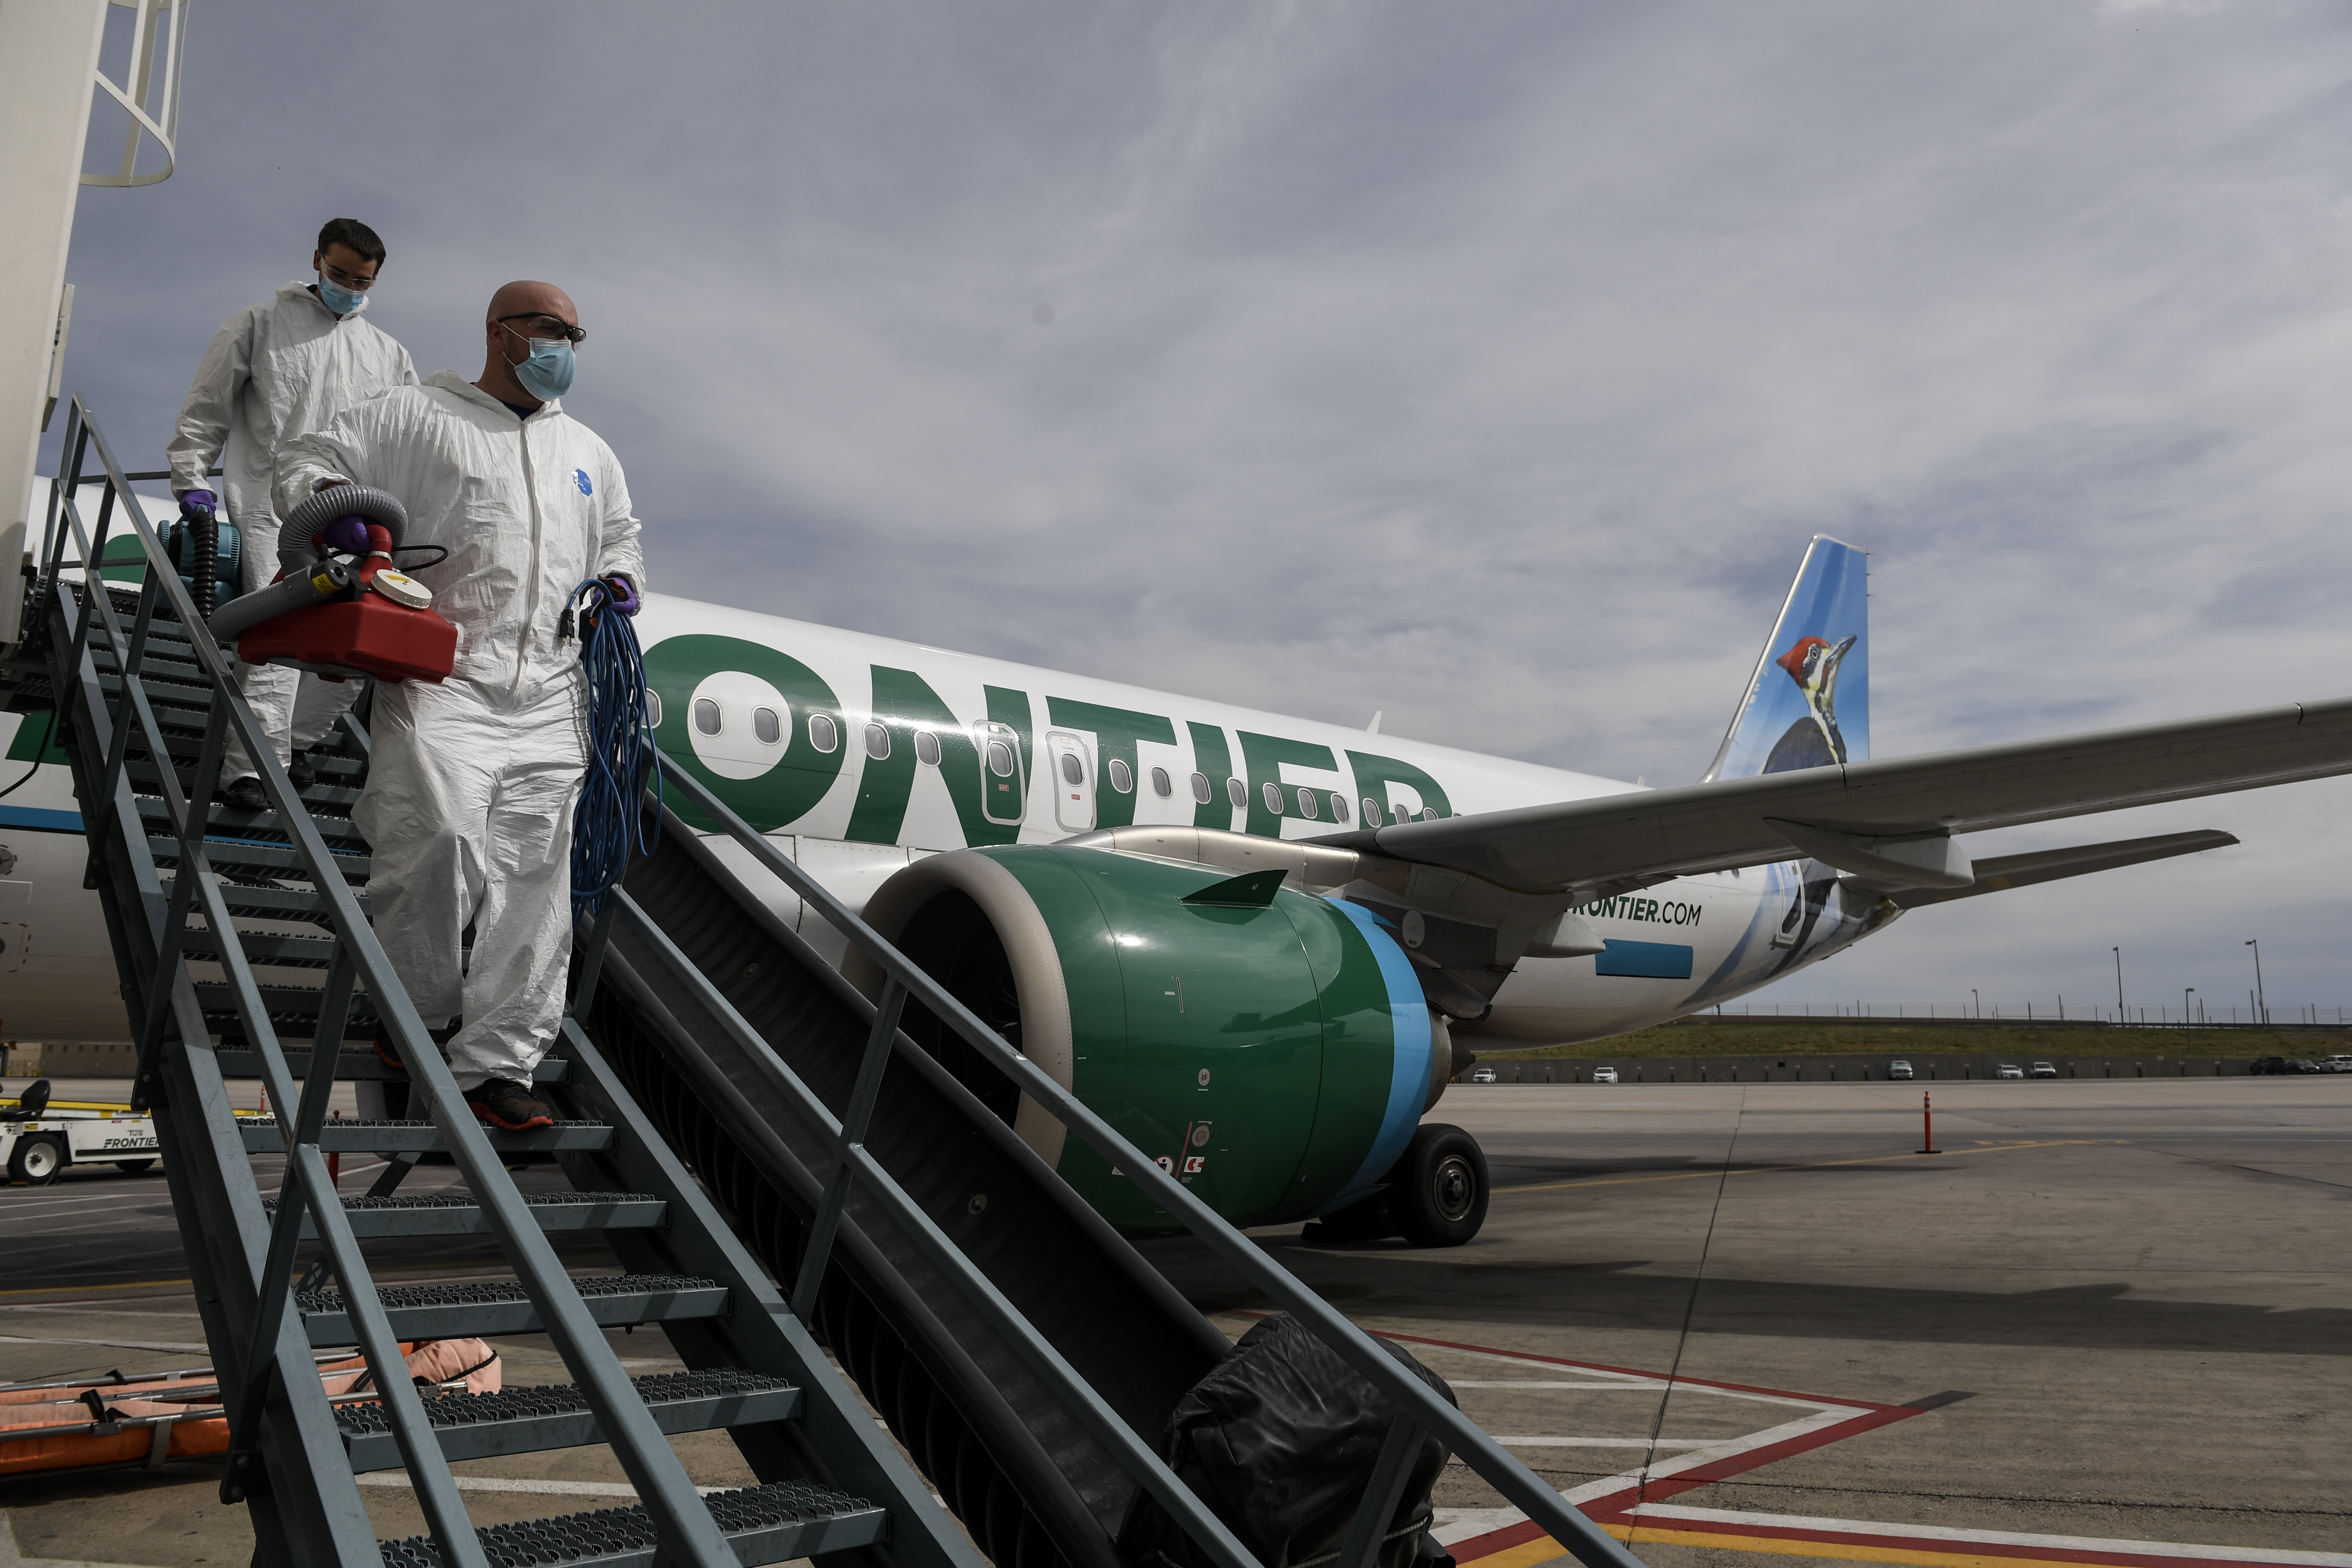 Frontier Airlines will require employees to get vaccinated or regularly take Covid tests